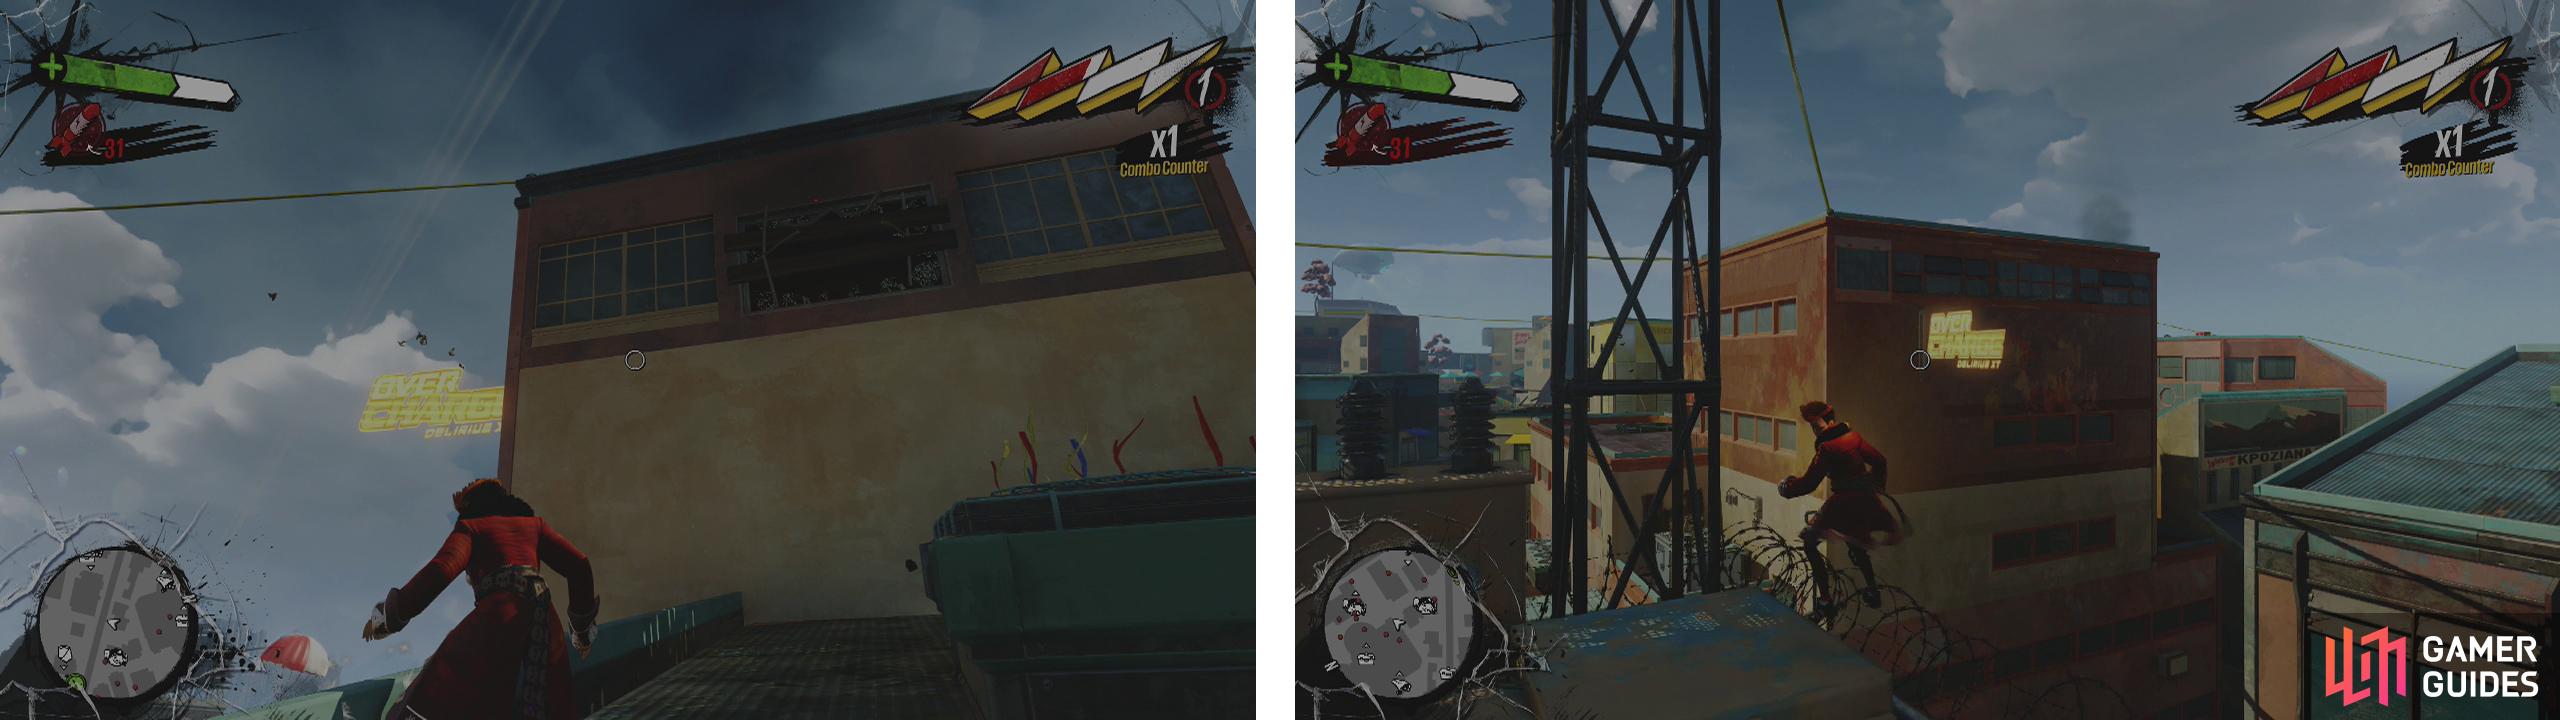 Take Back the Streets: Downtown - Sunset Overdrive Guide - IGN